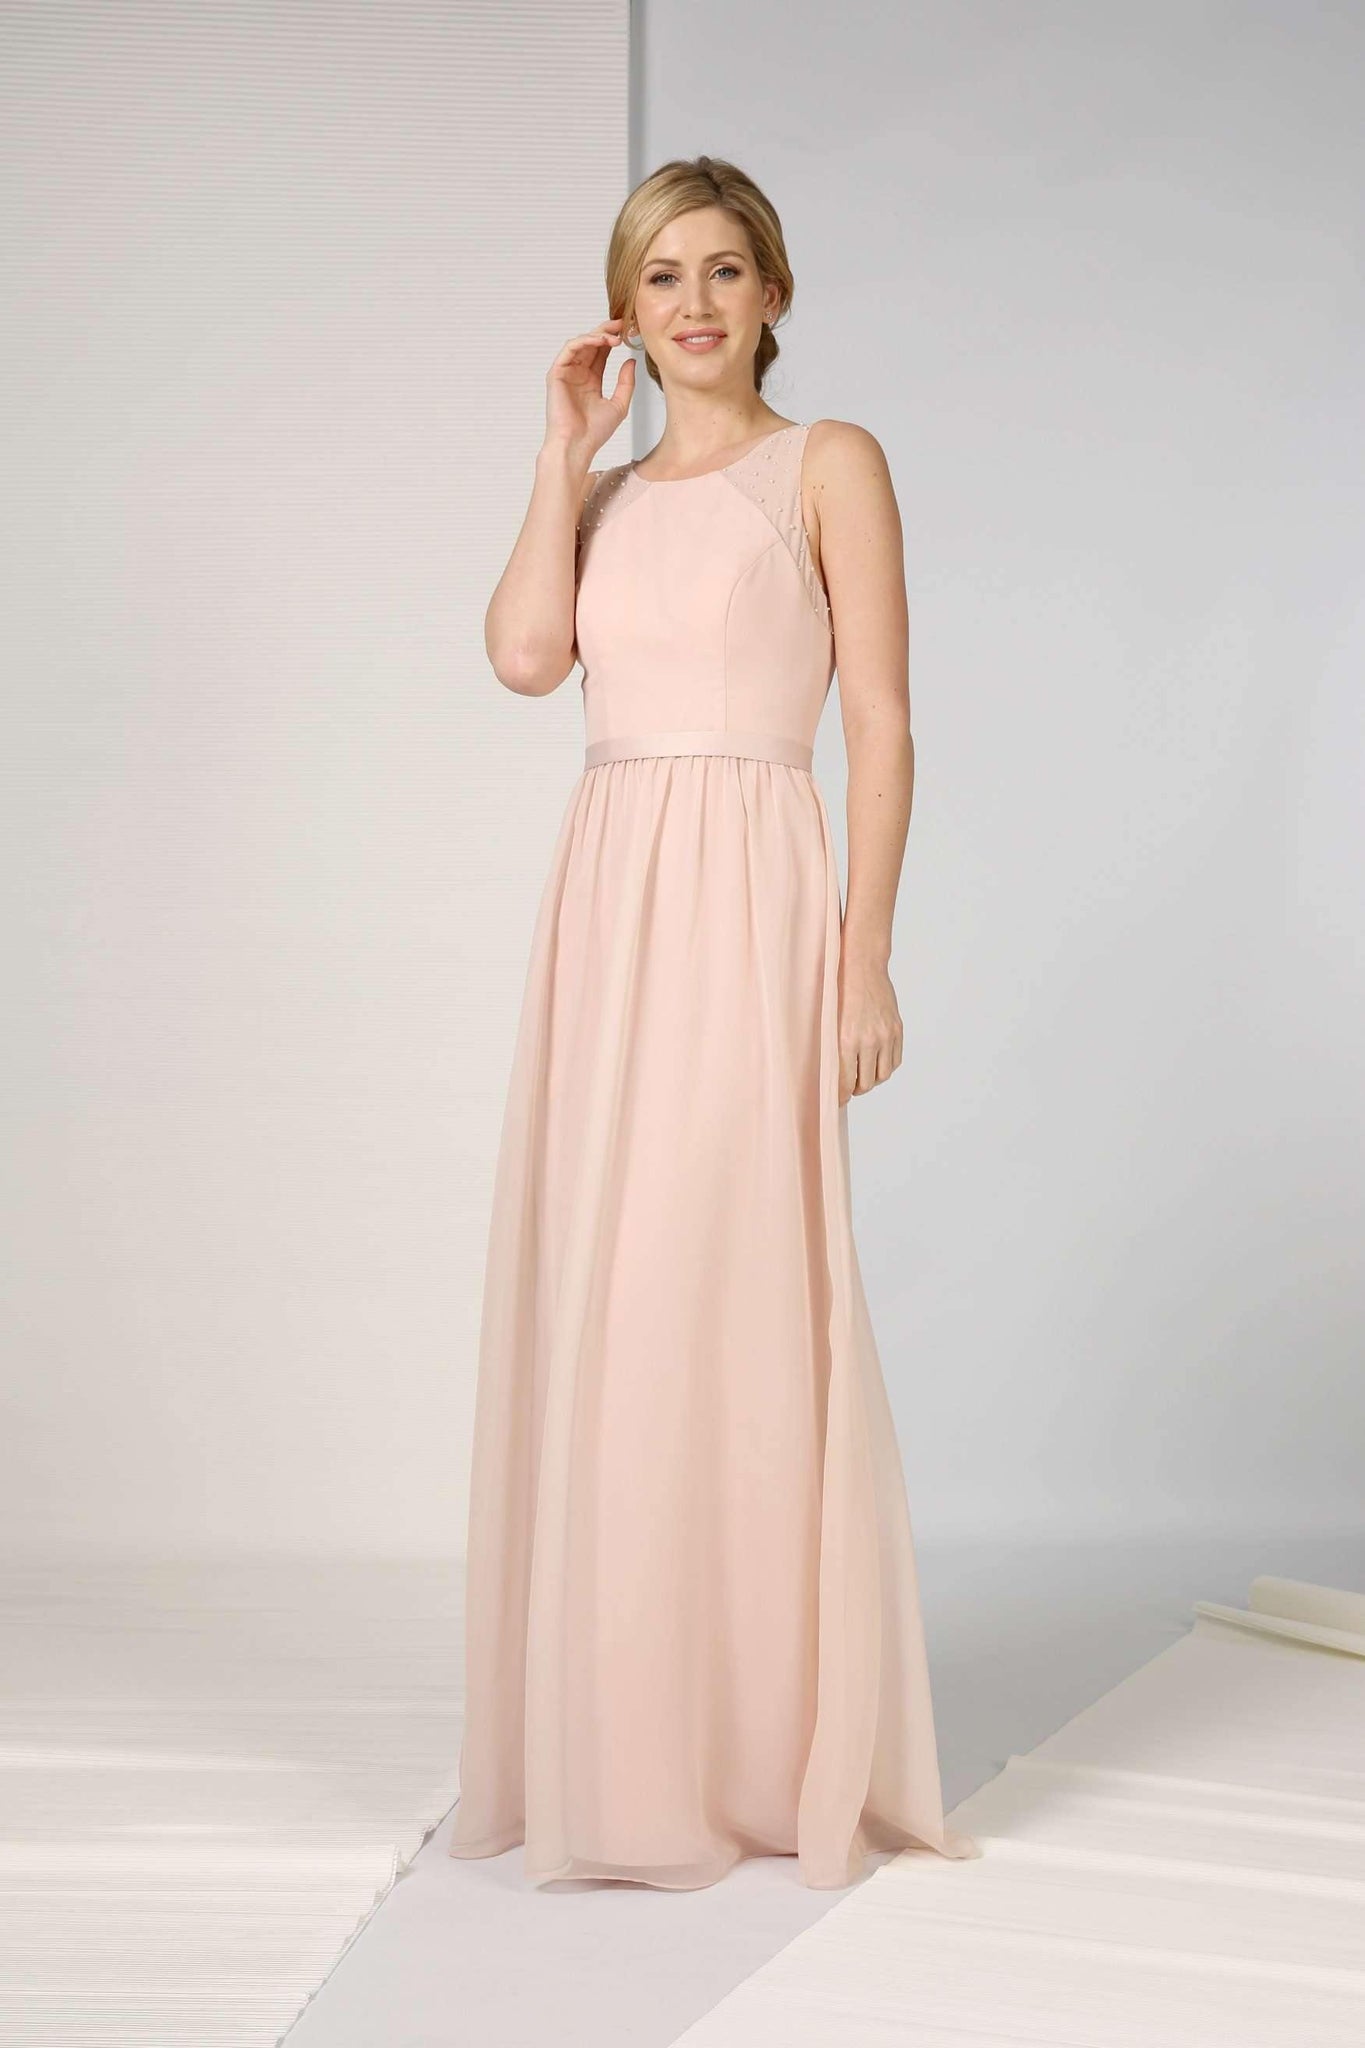 Lisa Nieve Occasion - Adore Bridal and Occasion Wear